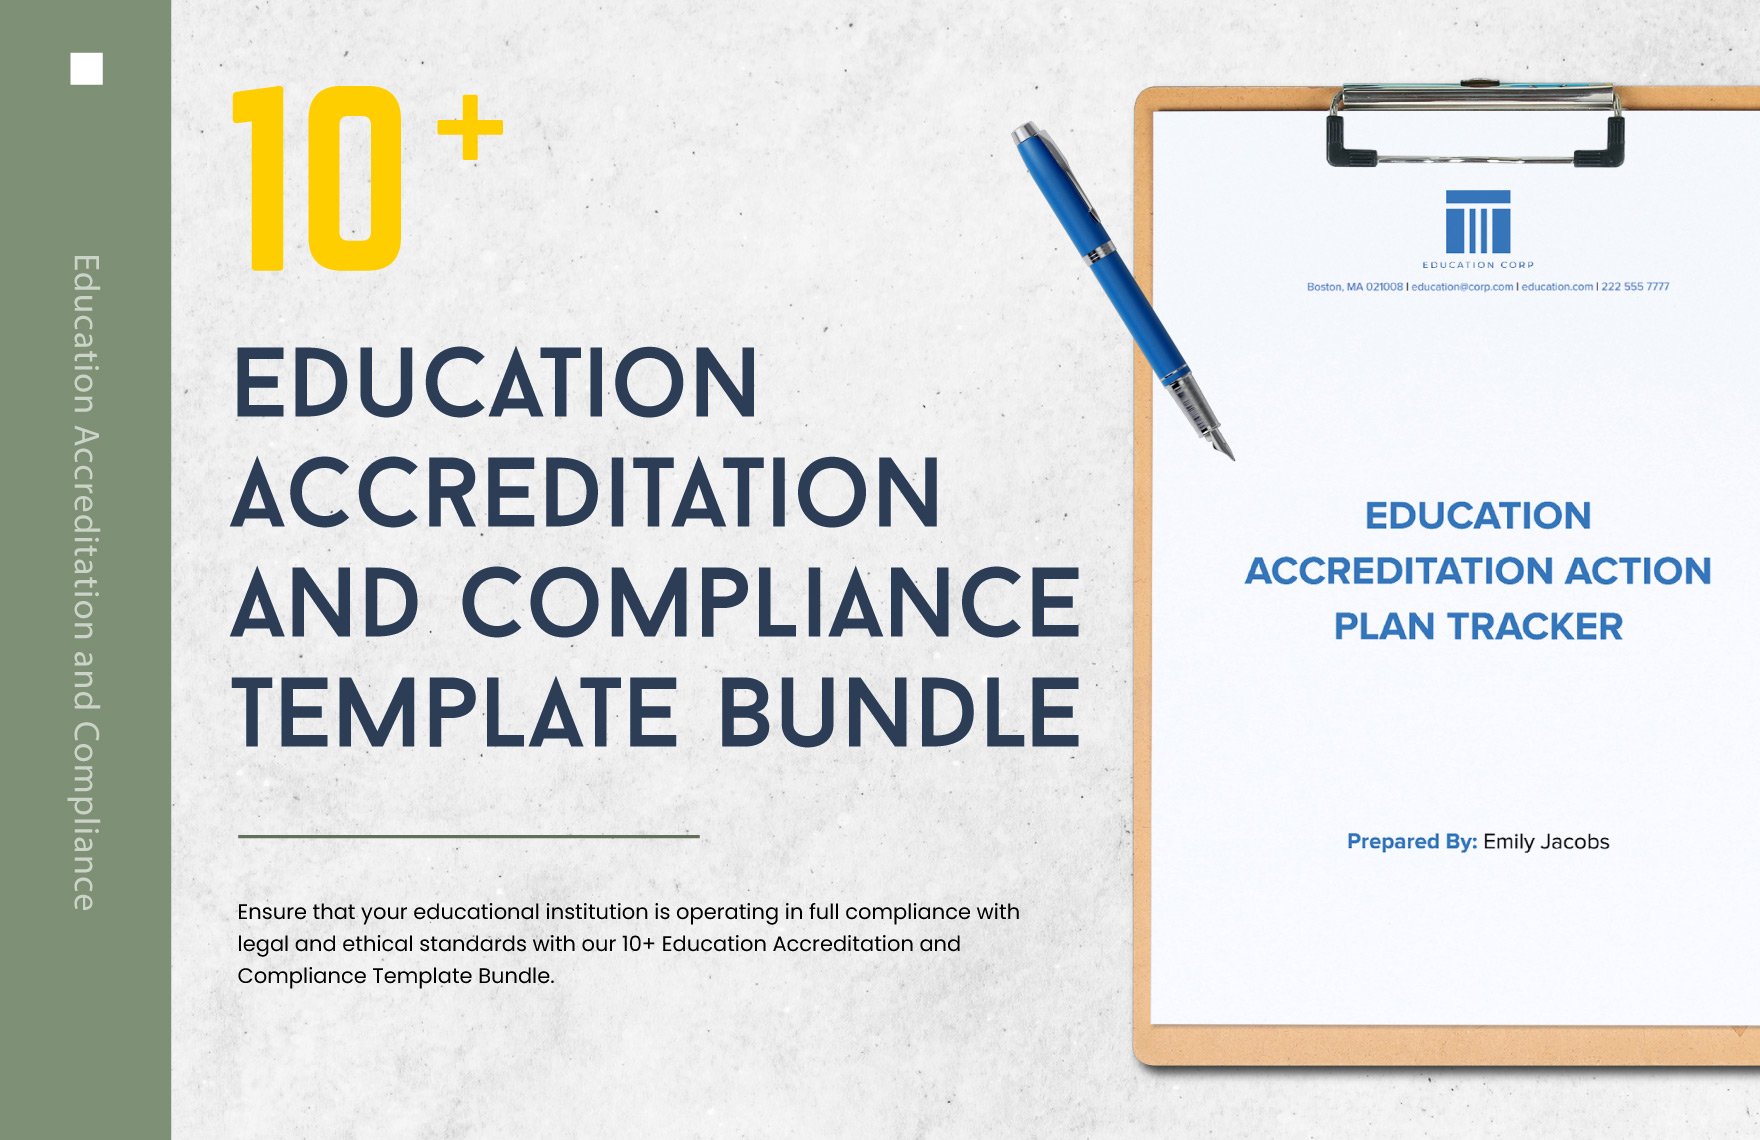 10+ Education Accreditation and Compliance Template Bundle